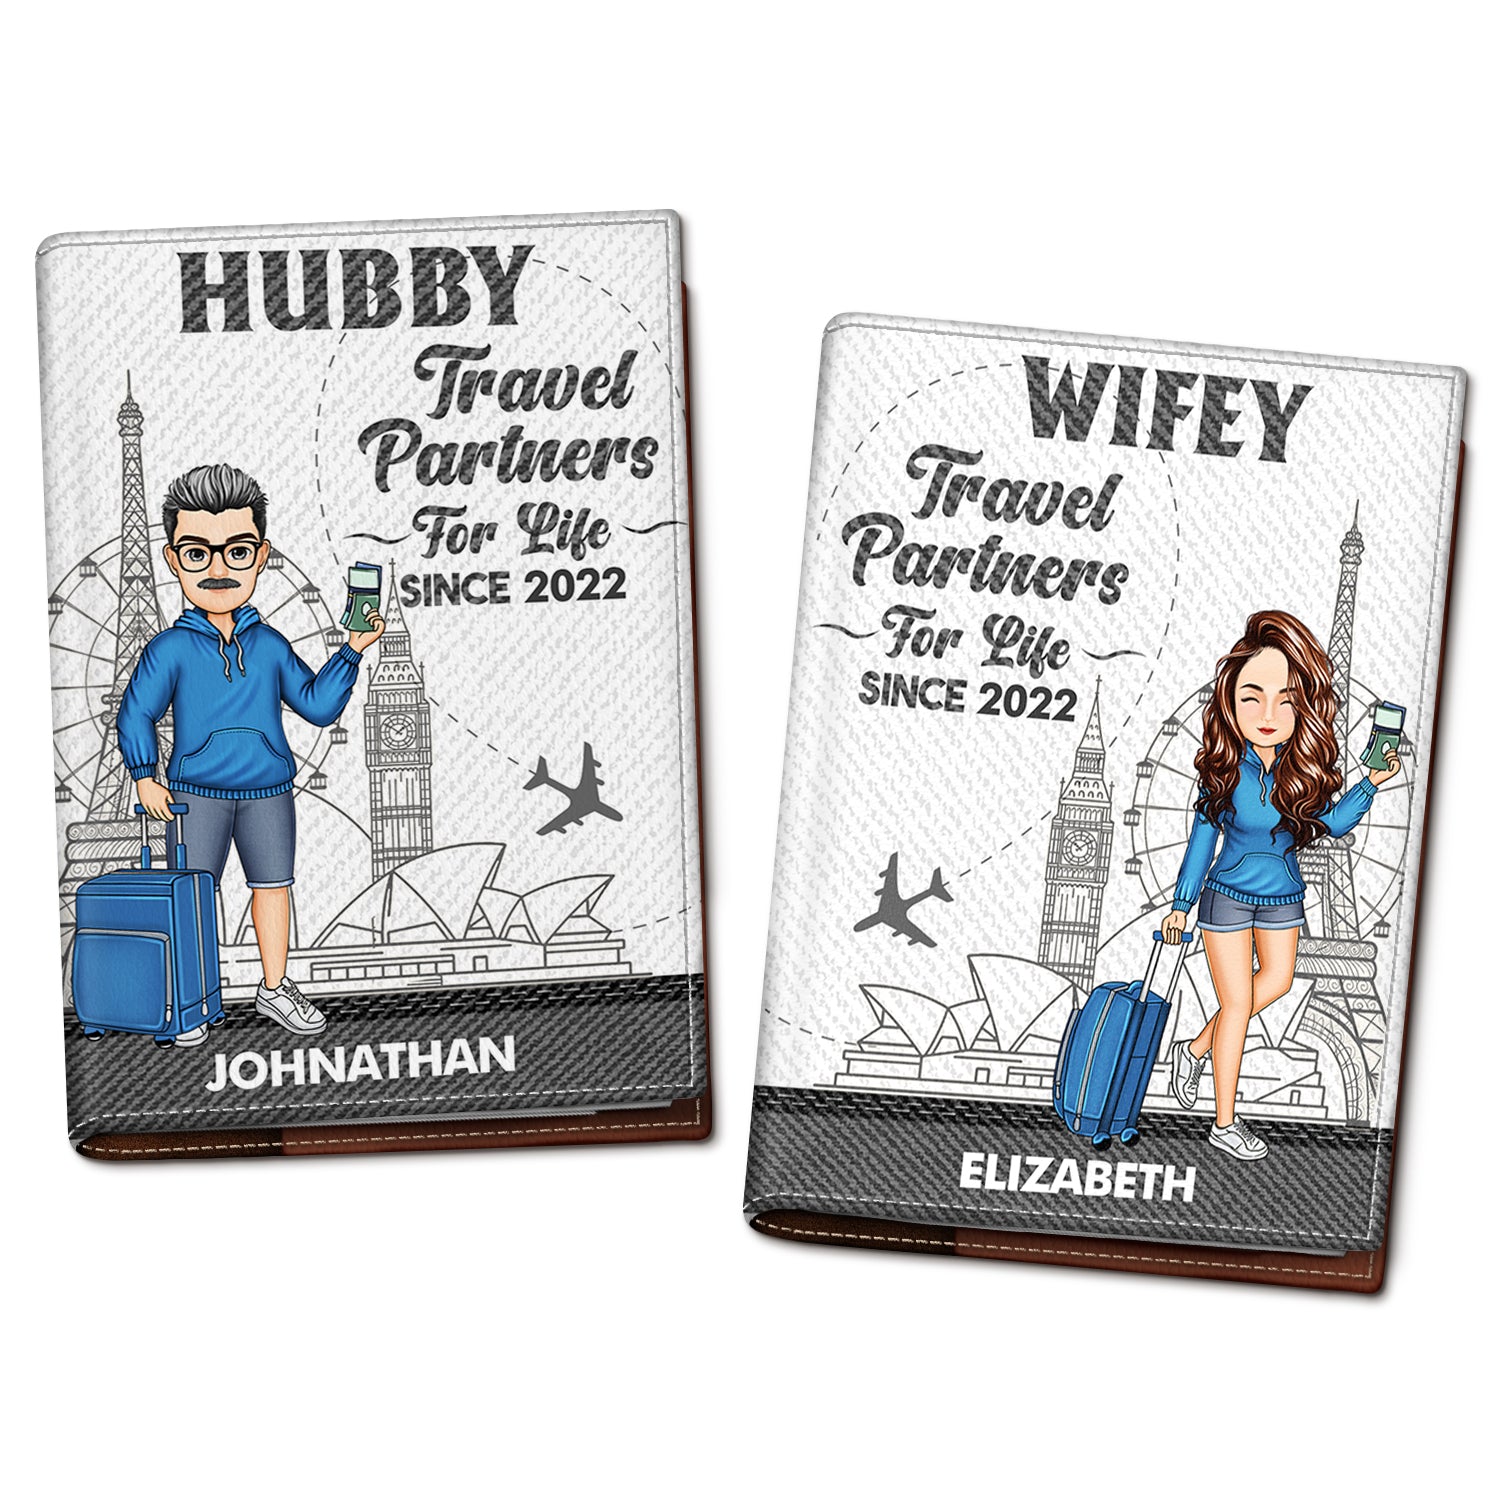 Hubby & Wifey Travel Partners For Life - Gift For Couples, Traveling Lovers Couple - Personalized Passport Cover, Passport Holder